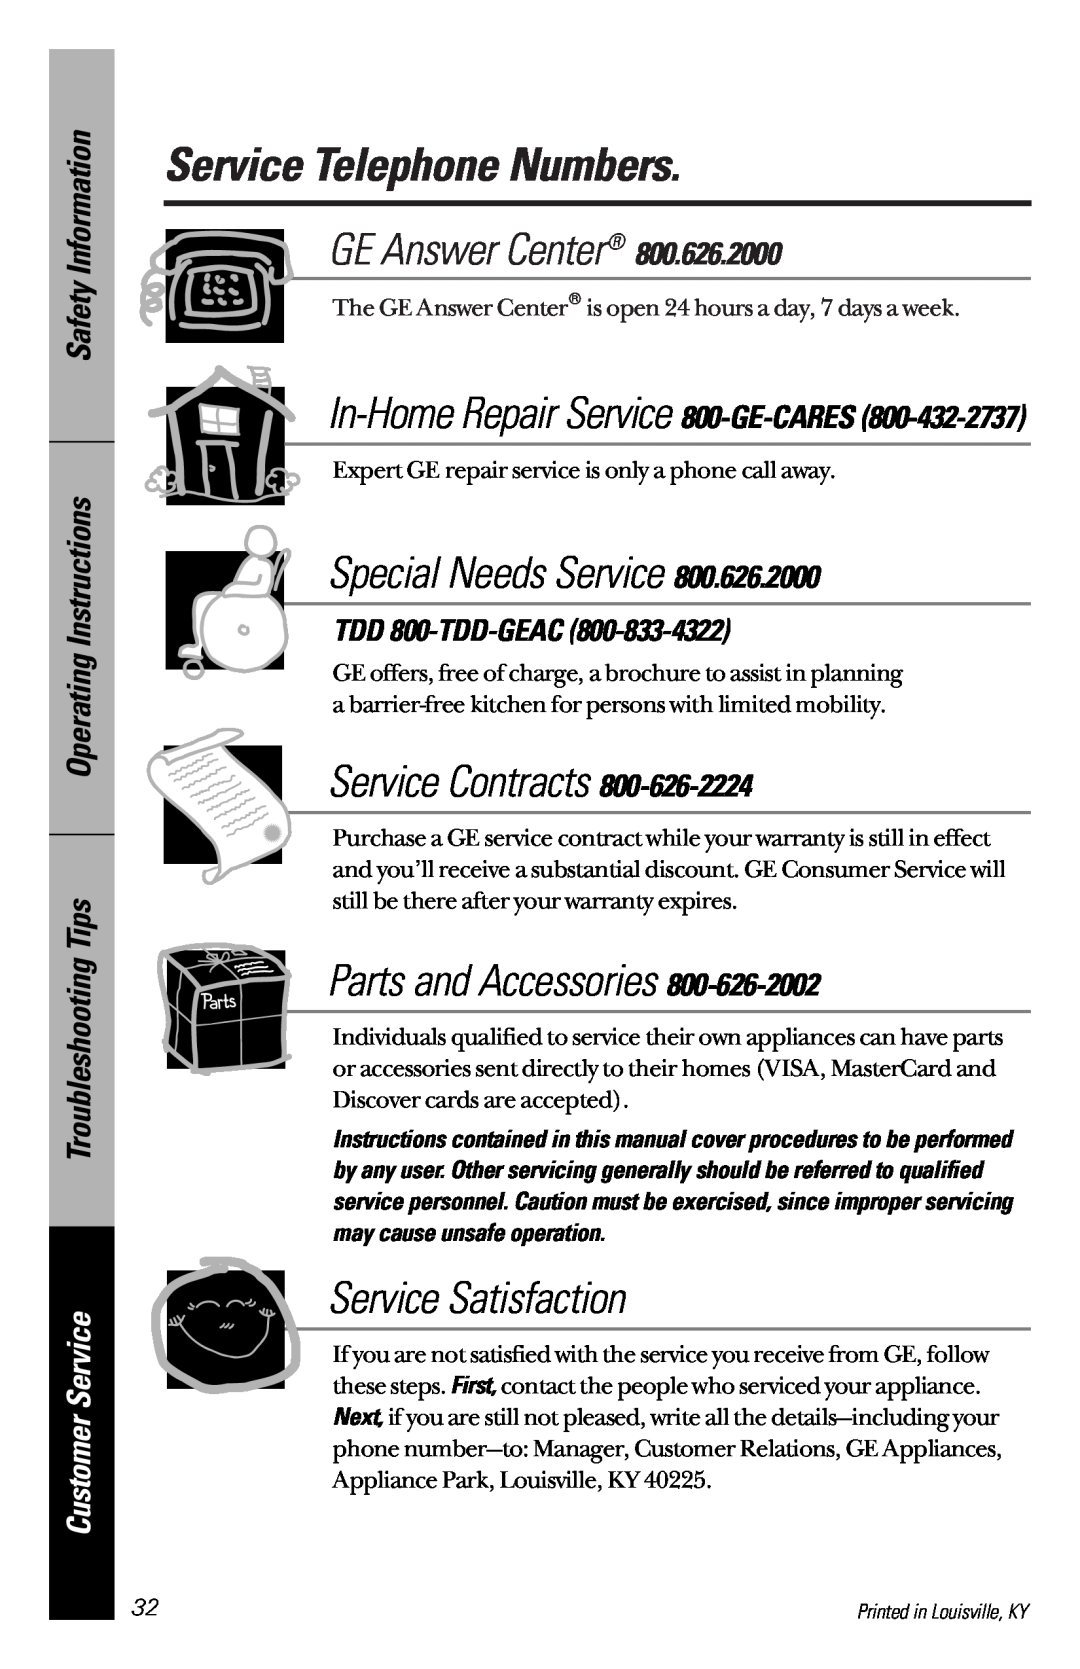 GE GSD5110 Service Telephone Numbers, Safety Information Operating Instructions Troubleshooting Tips, Customer Service 